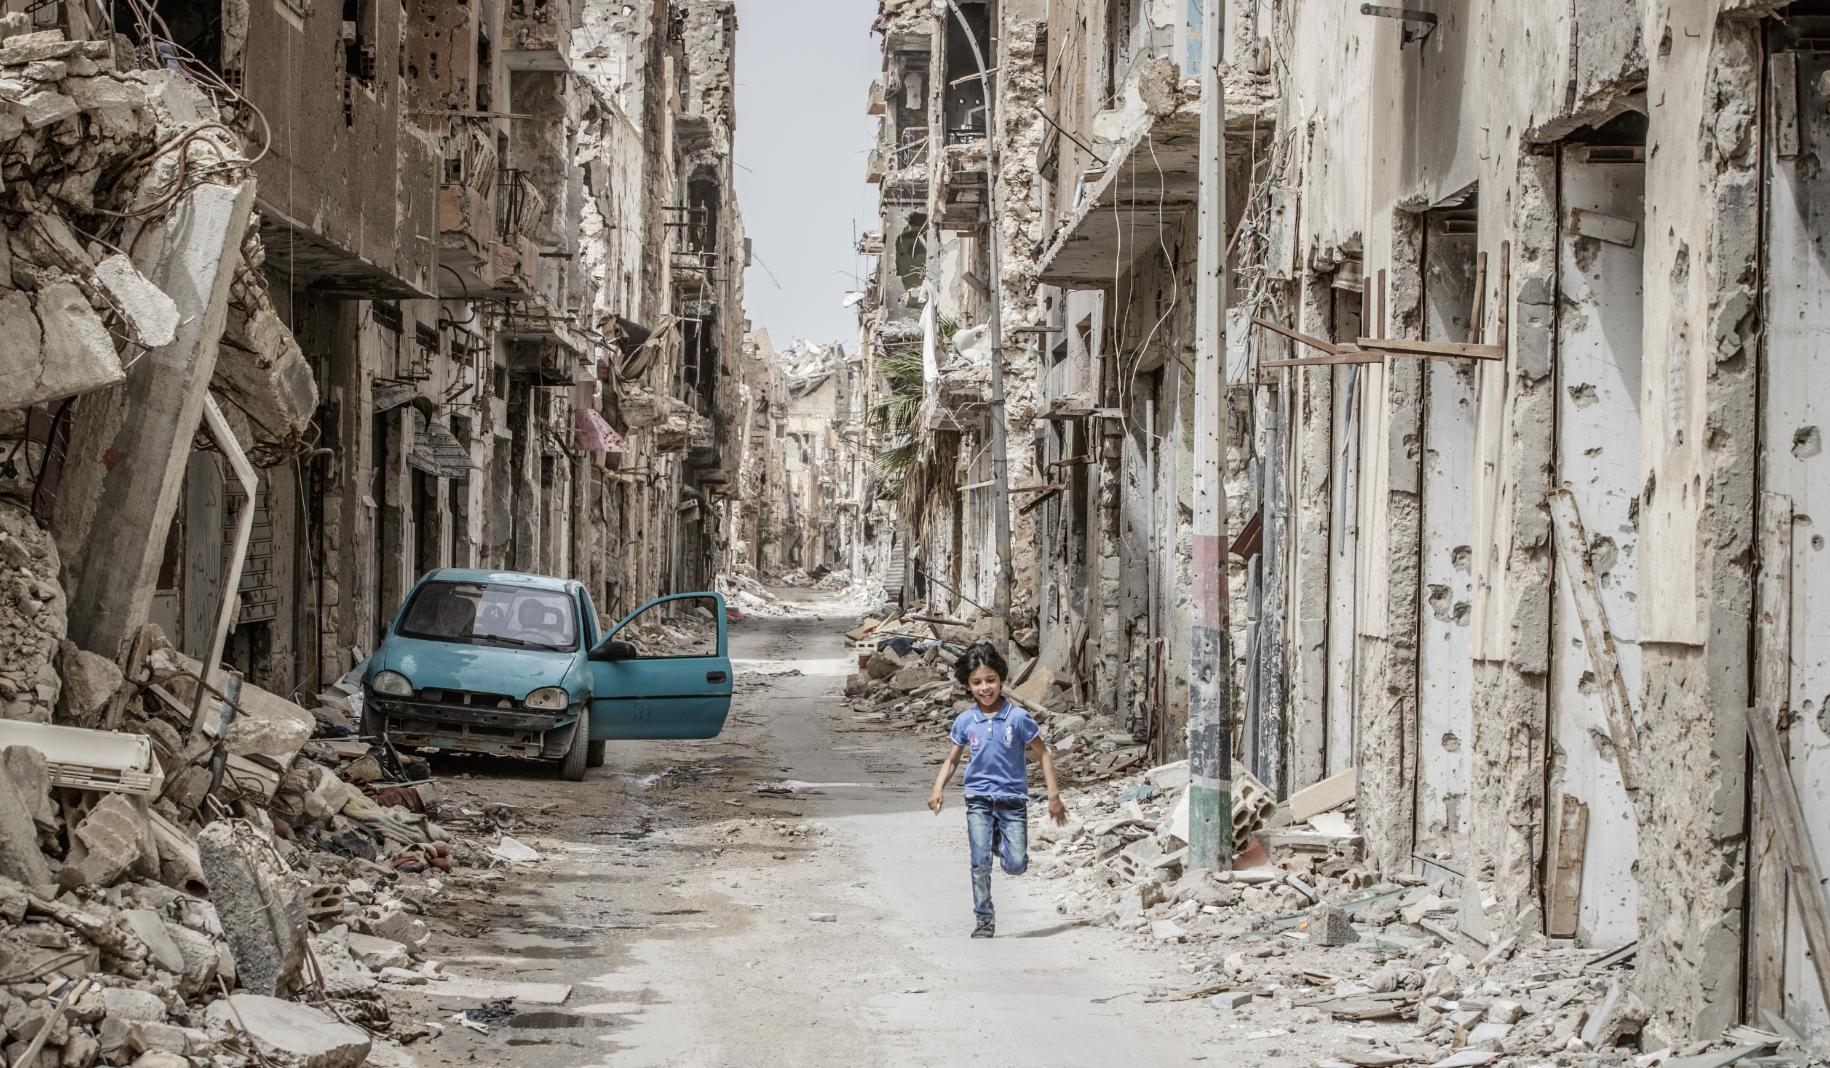 A child runs through the debris and wreckage in downtown Benghazi, Libya.